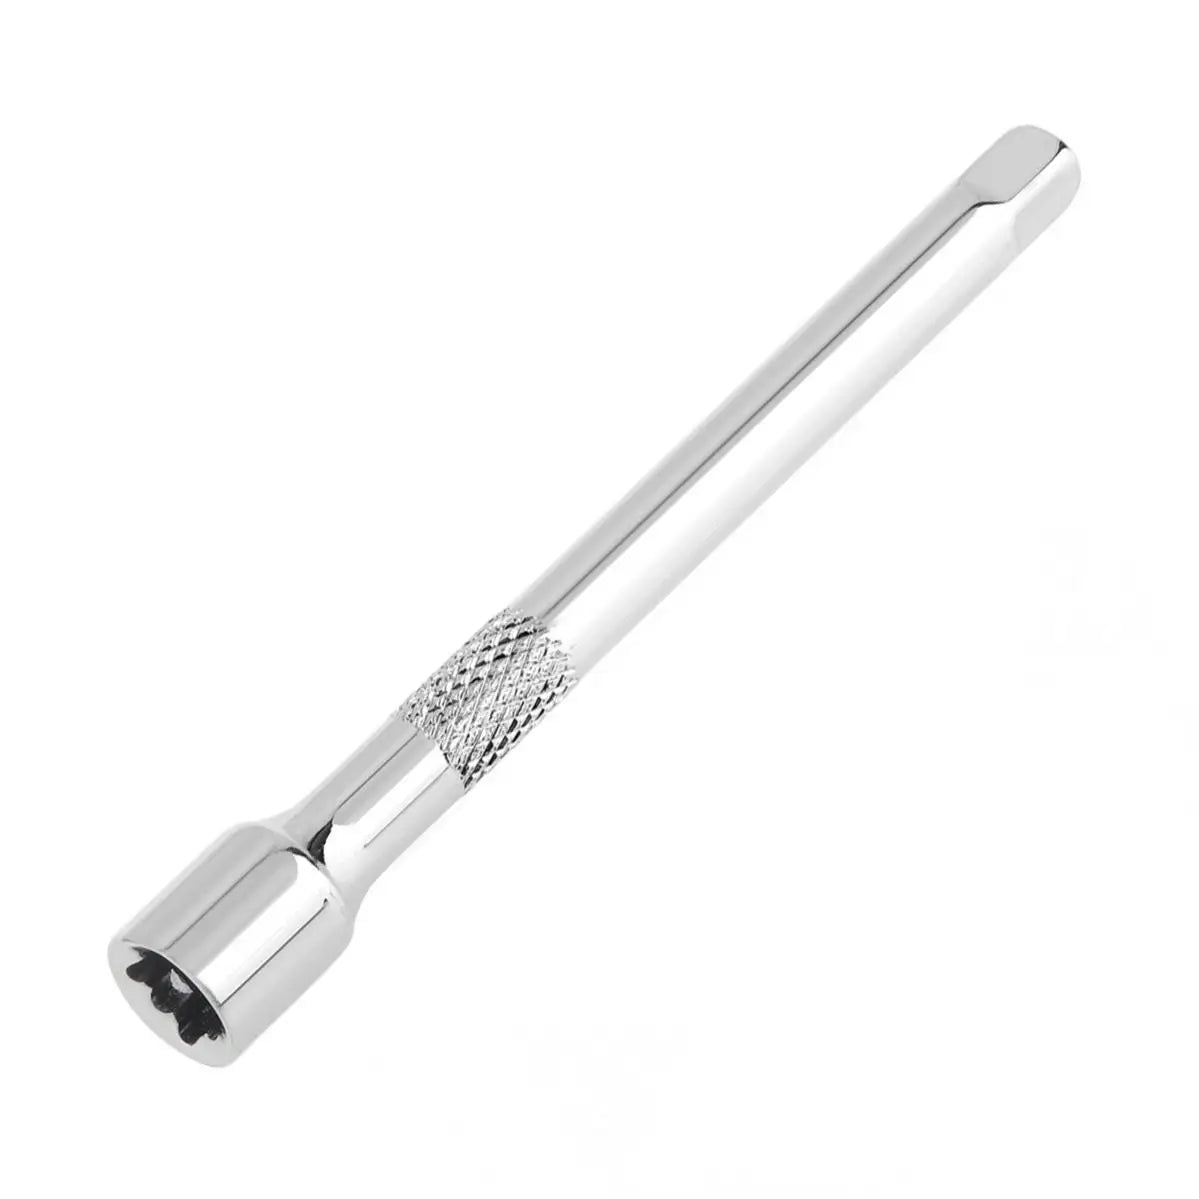 1/4 Chromed Steel 102MM Extension Bar Drive Ratchet Wrench Socket Adapter Power Drill Adapter